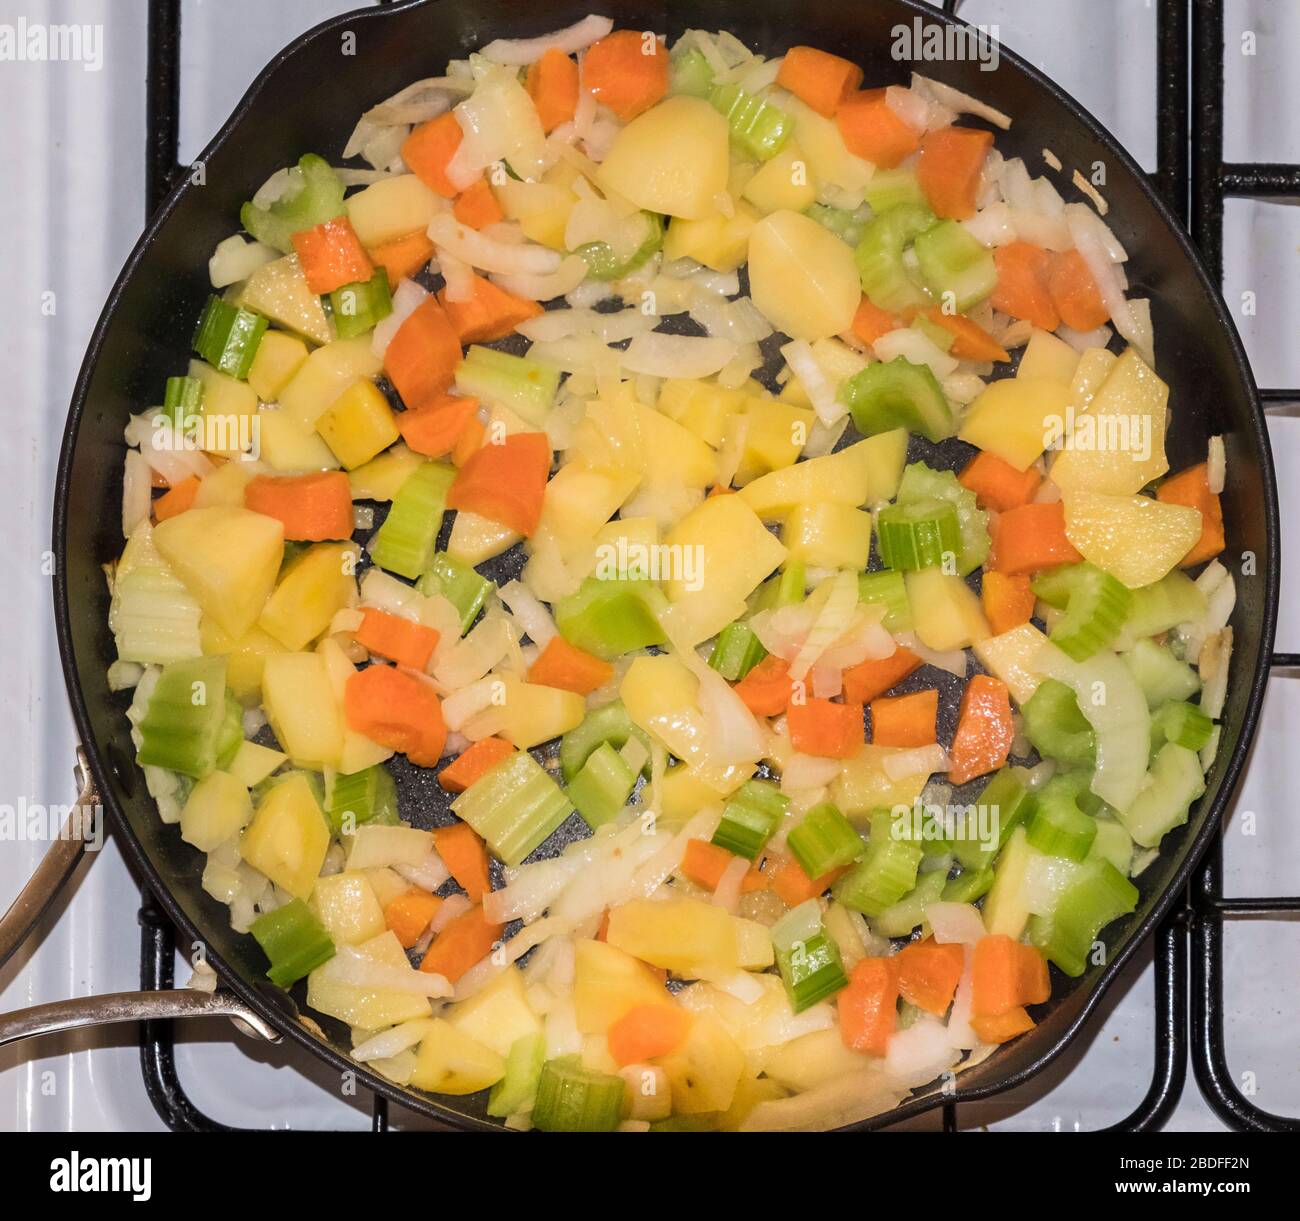 Sauteing stew vegetables in a frying pan on a stove before stewing Stock Photo